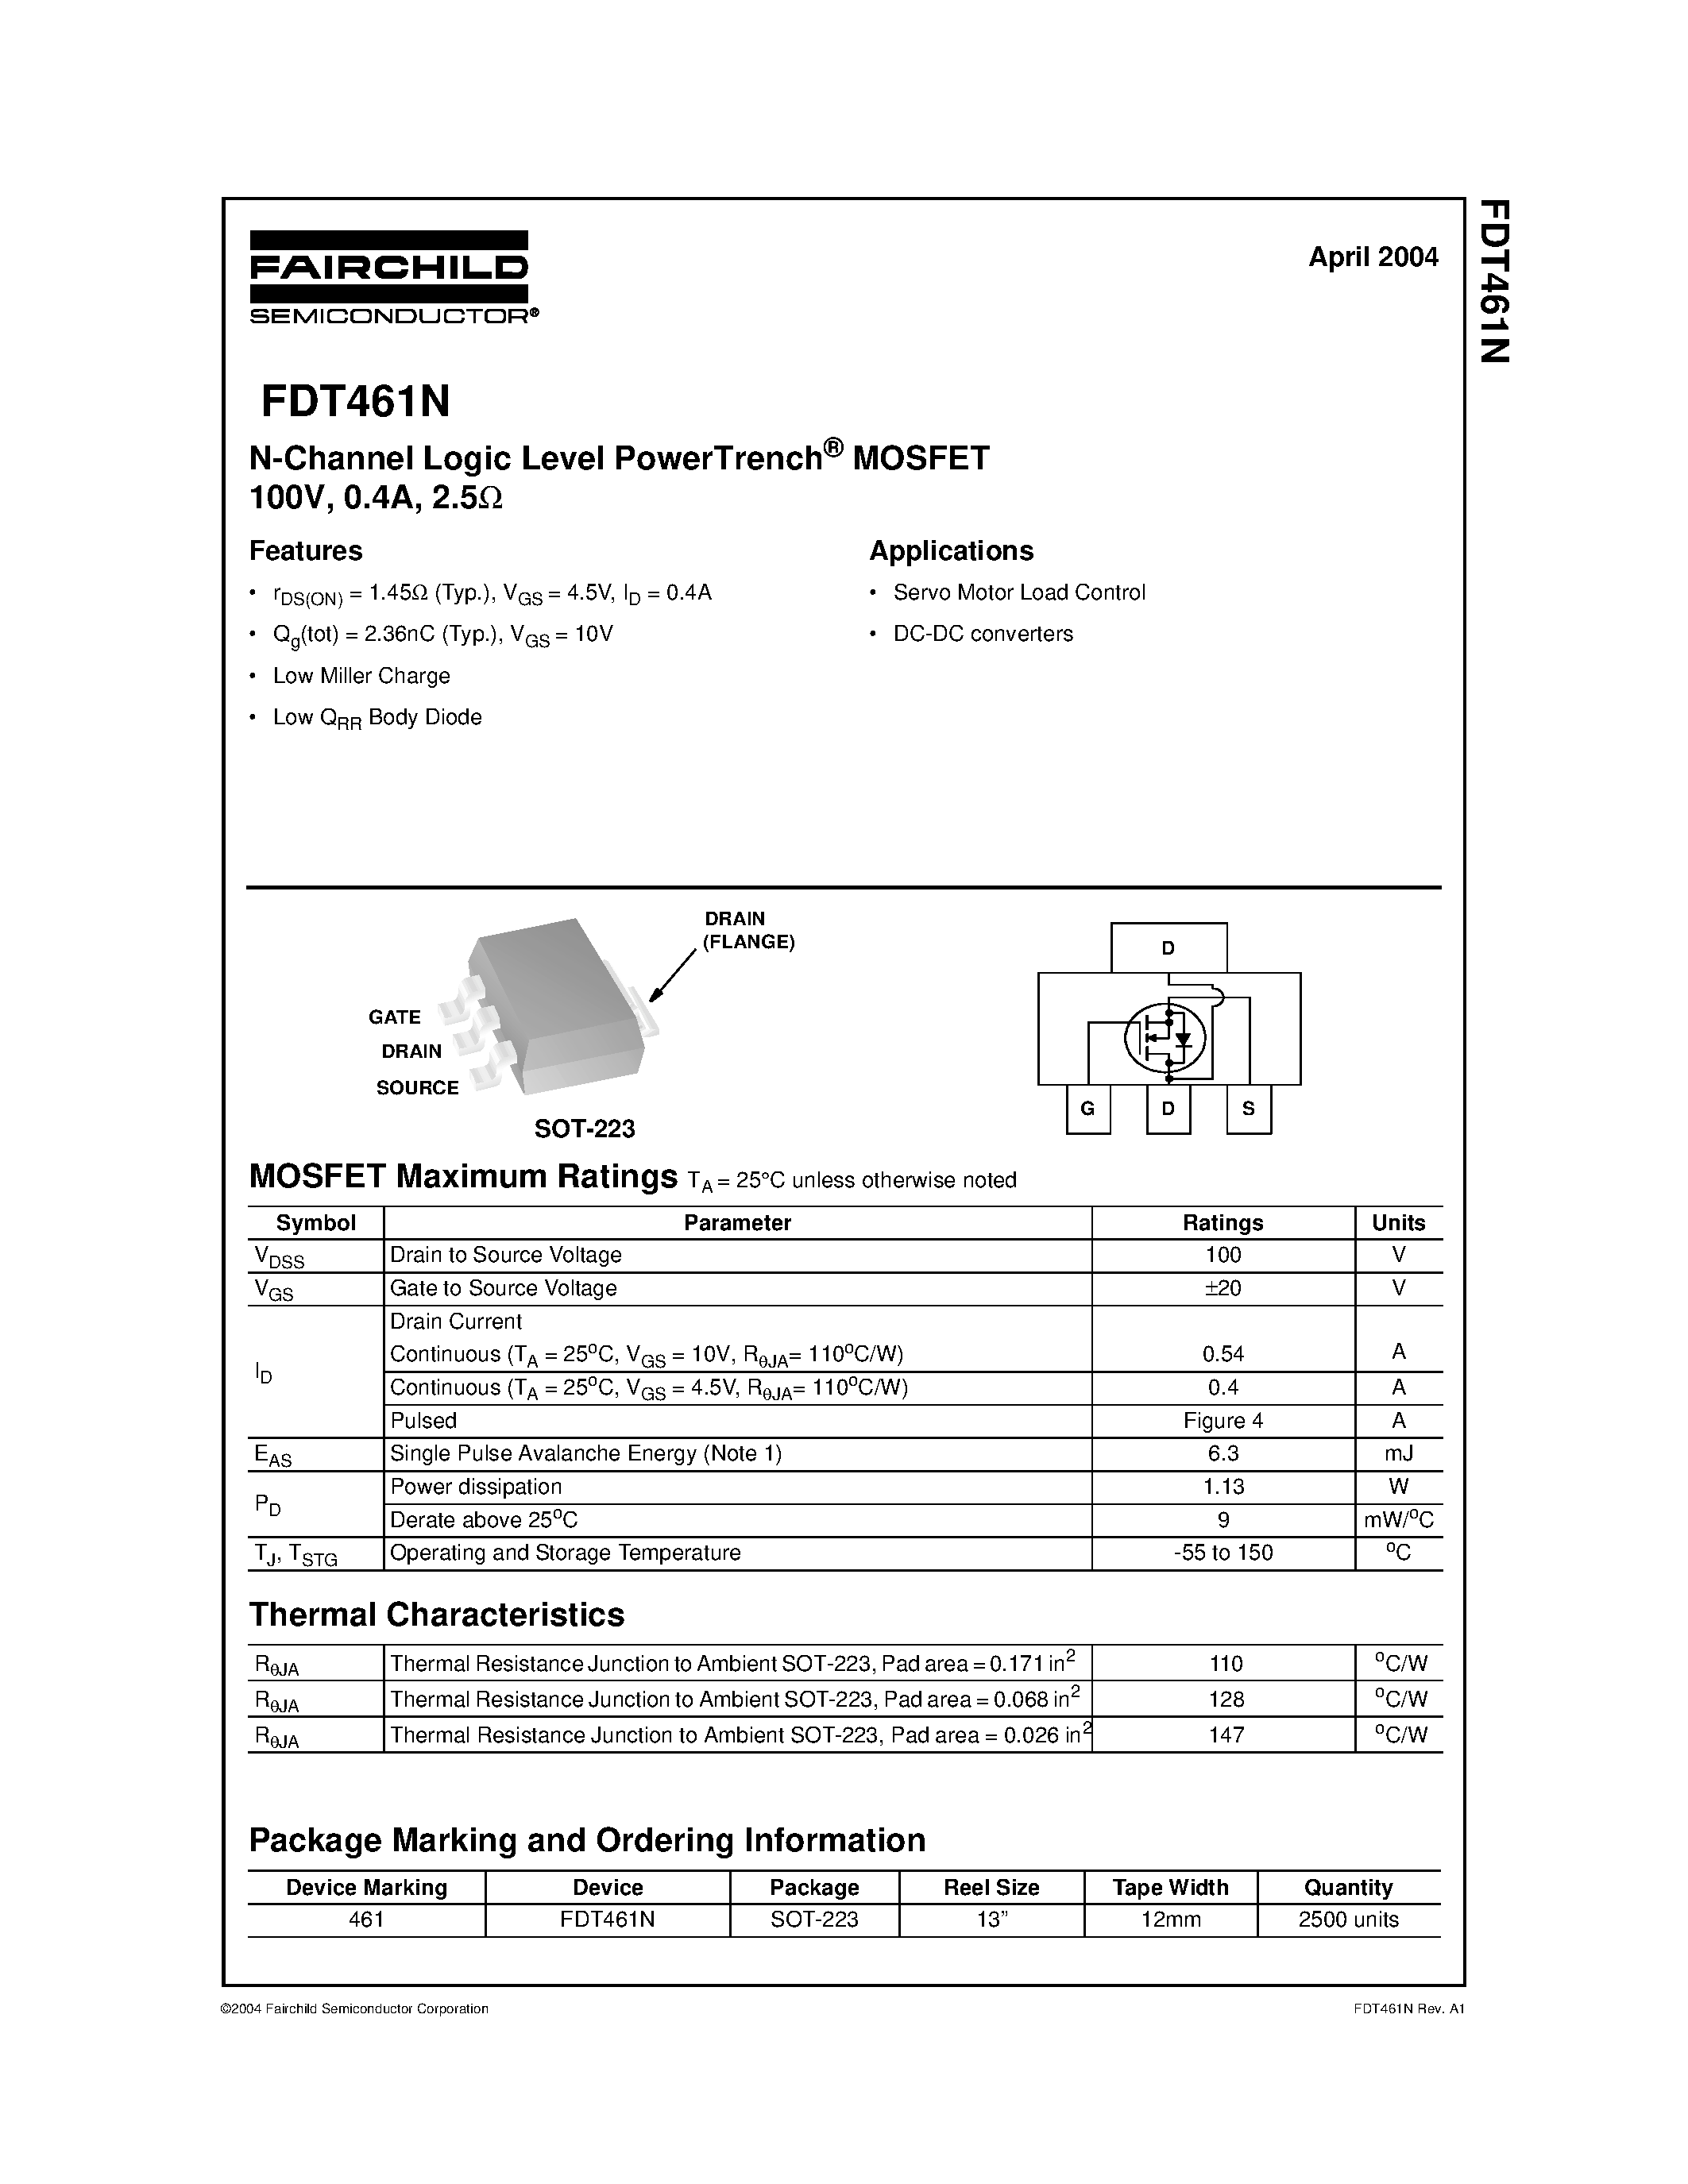 Datasheet FDT461N - N-Channel Logic Level PowerTrench MOSFET page 1